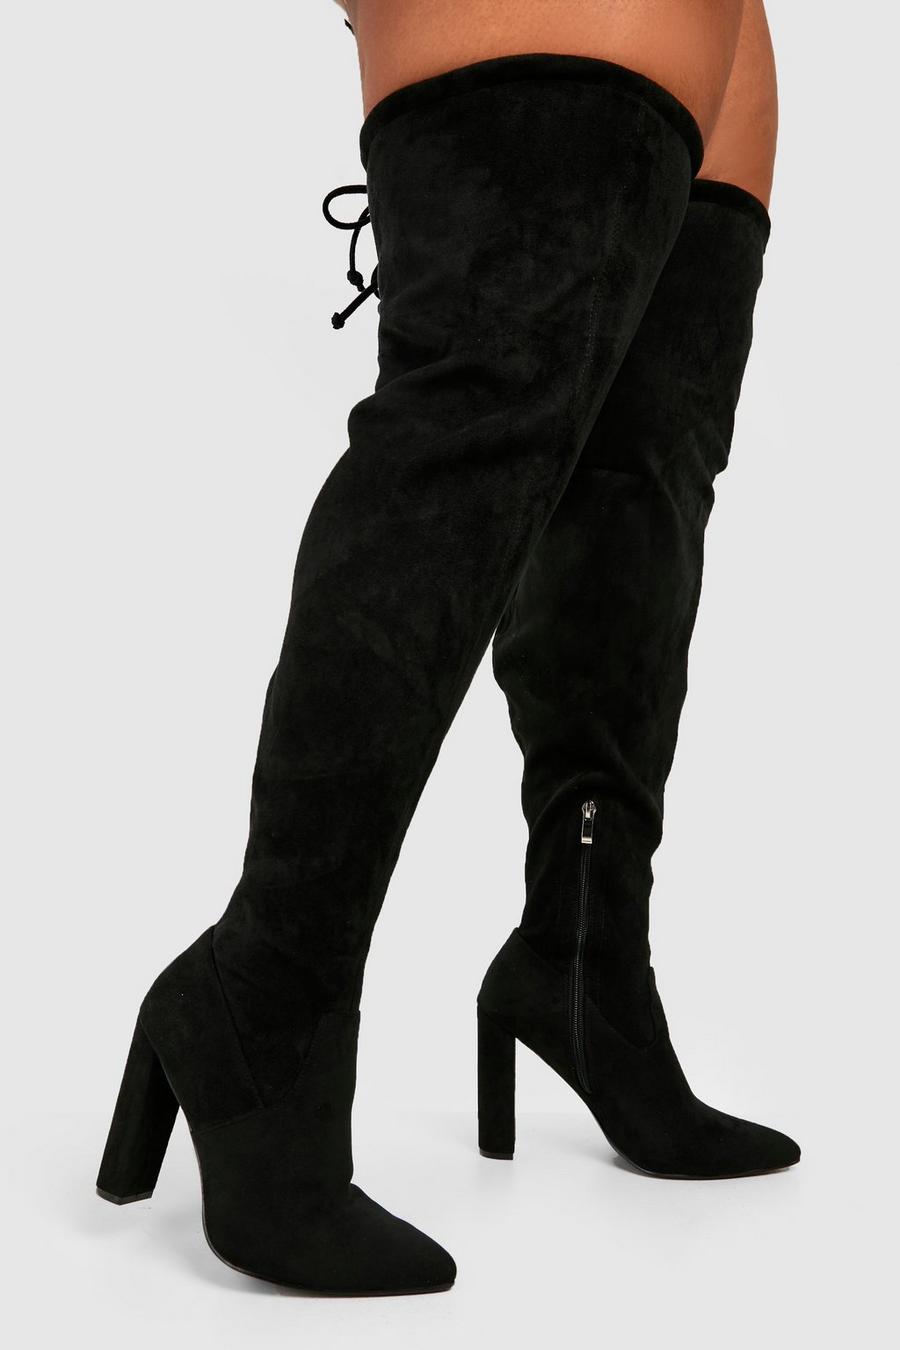 Black negro Wide Calf Tie Detail Heeled Over The Knee Boots